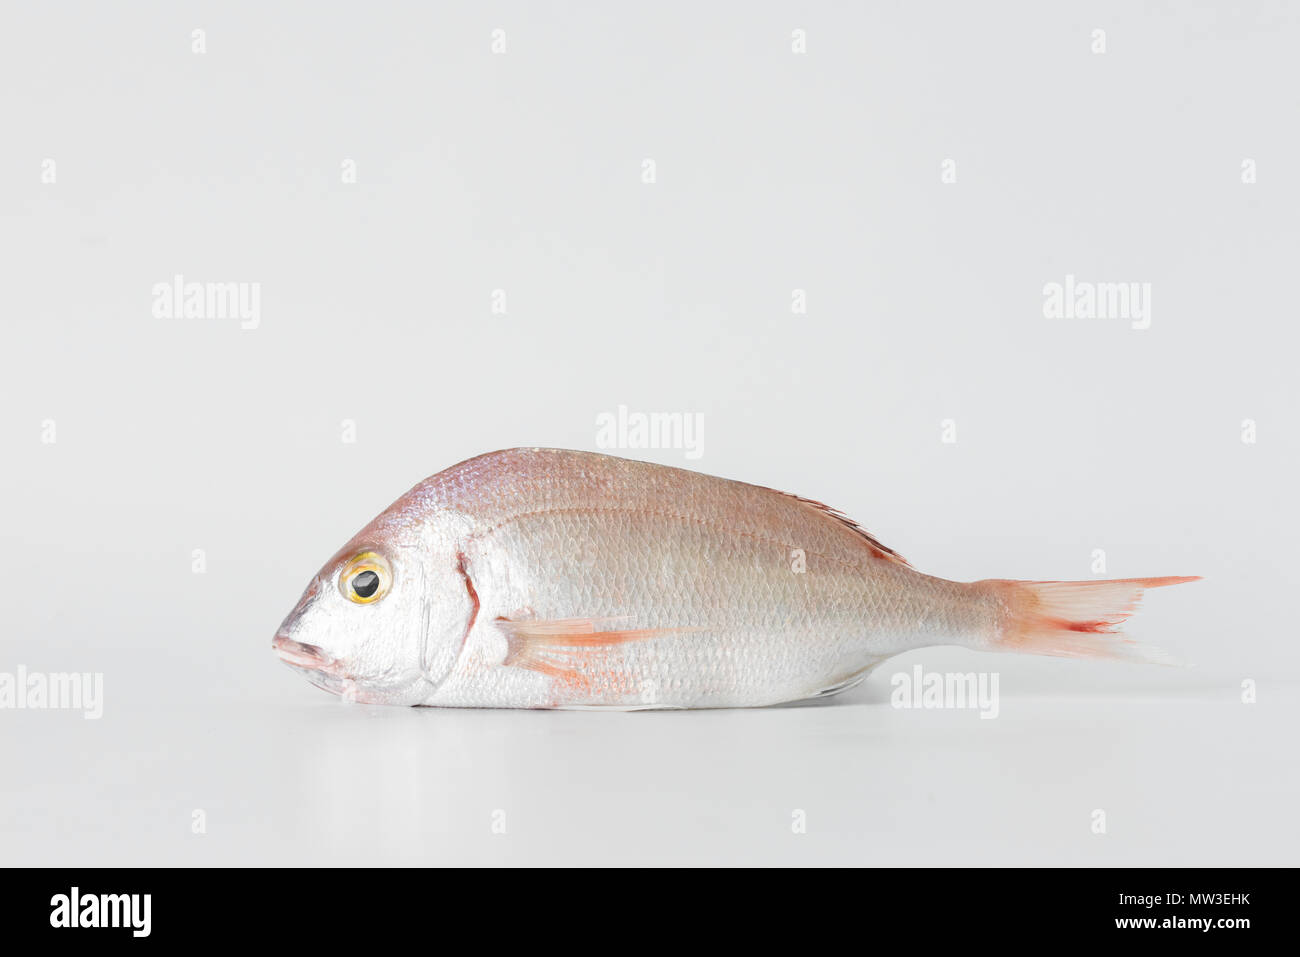 Seafood and Fish in a Flatlay on White Background. Clams, Oysters, CrayFish, Red Scorpionfish and Seabream. Stock Photo